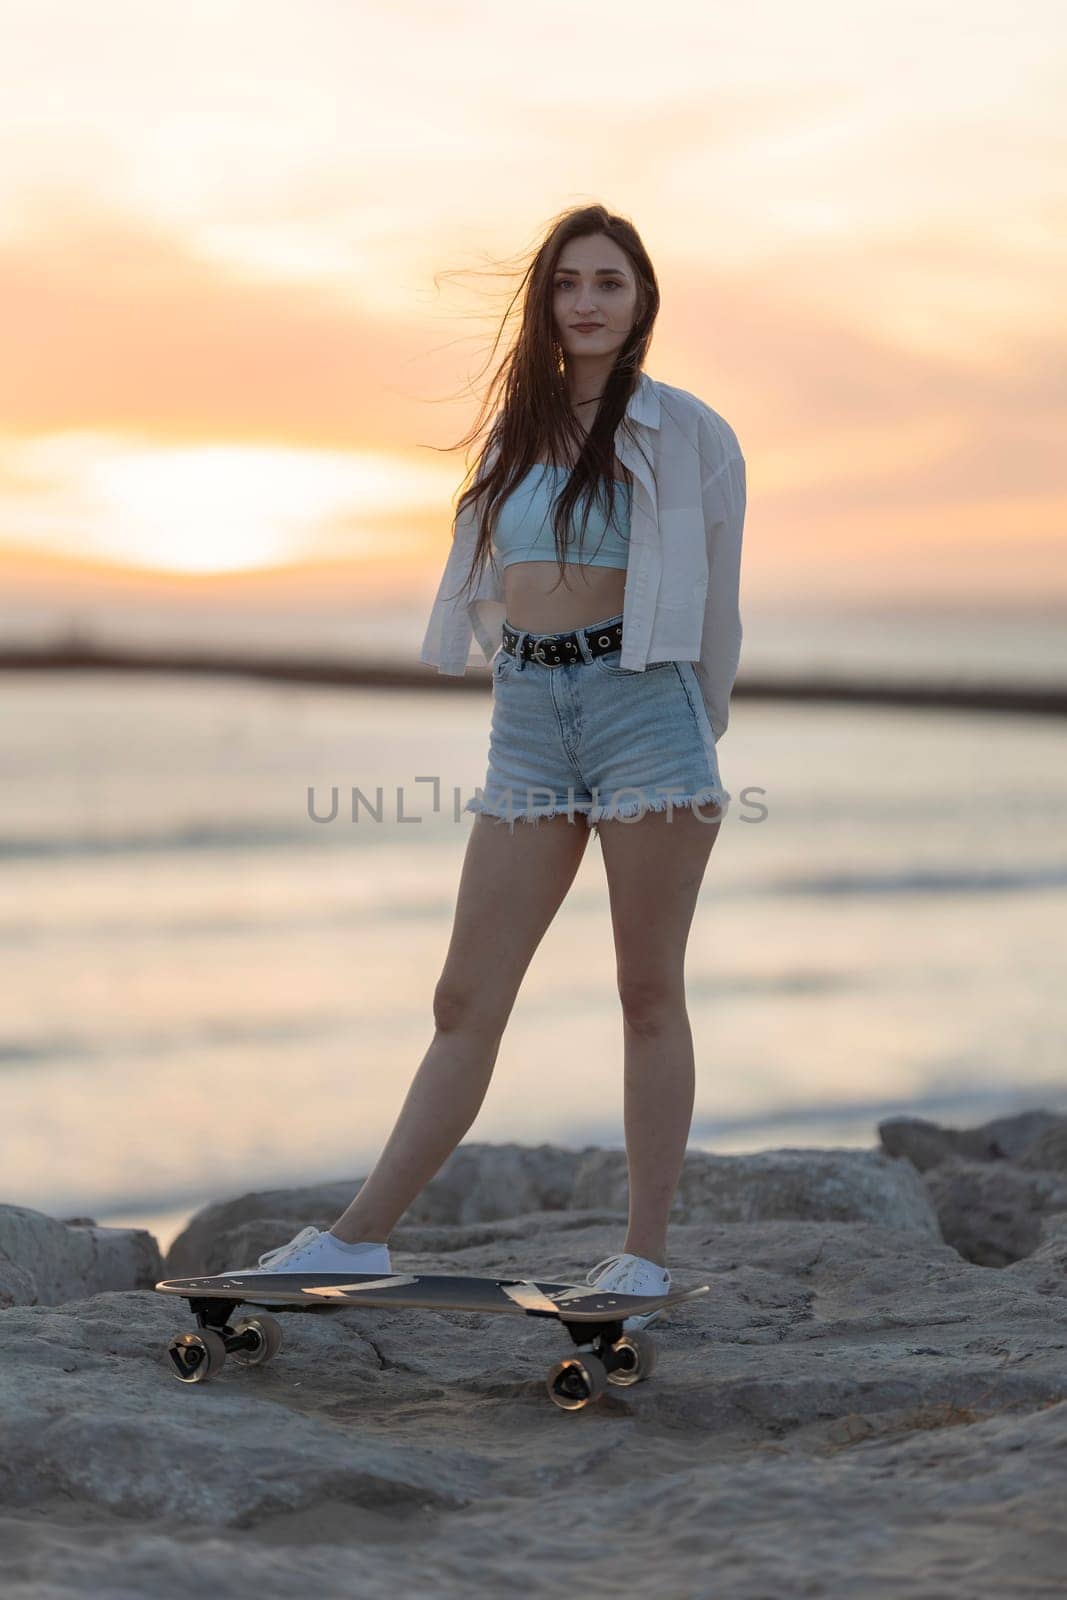 A woman is standing on a skateboard on a beach by Studia72